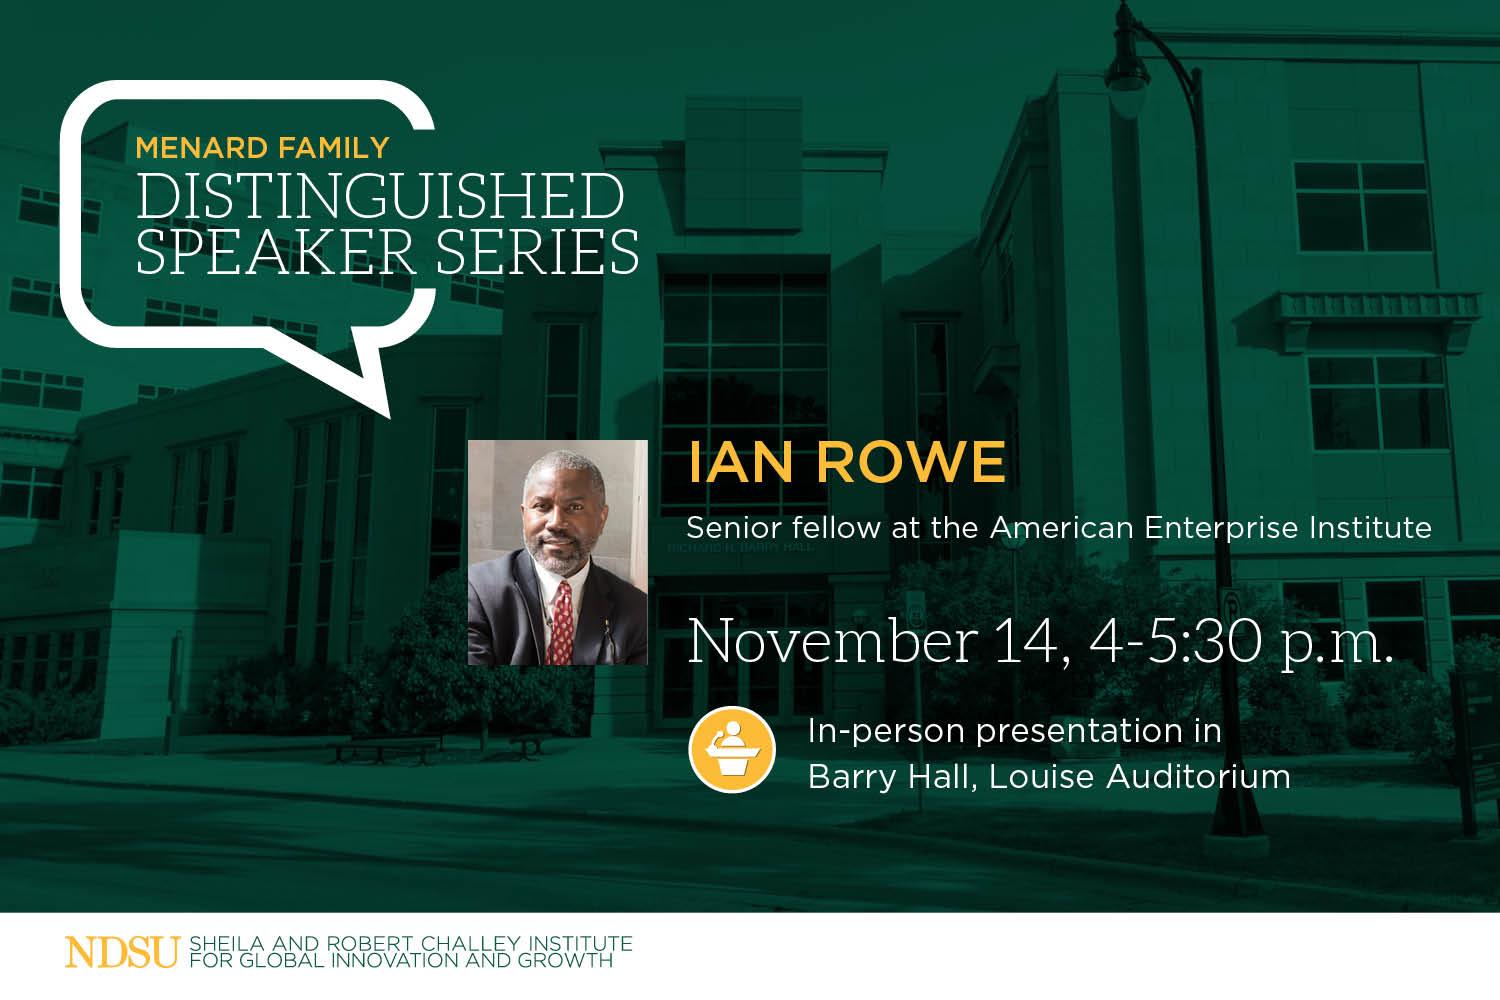 NDSU's Challey Institute invites the public to attend “A Conversation on Agency, Education and Upward Mobility” with Ian Rowe on Tuesday, Nov. 14. 